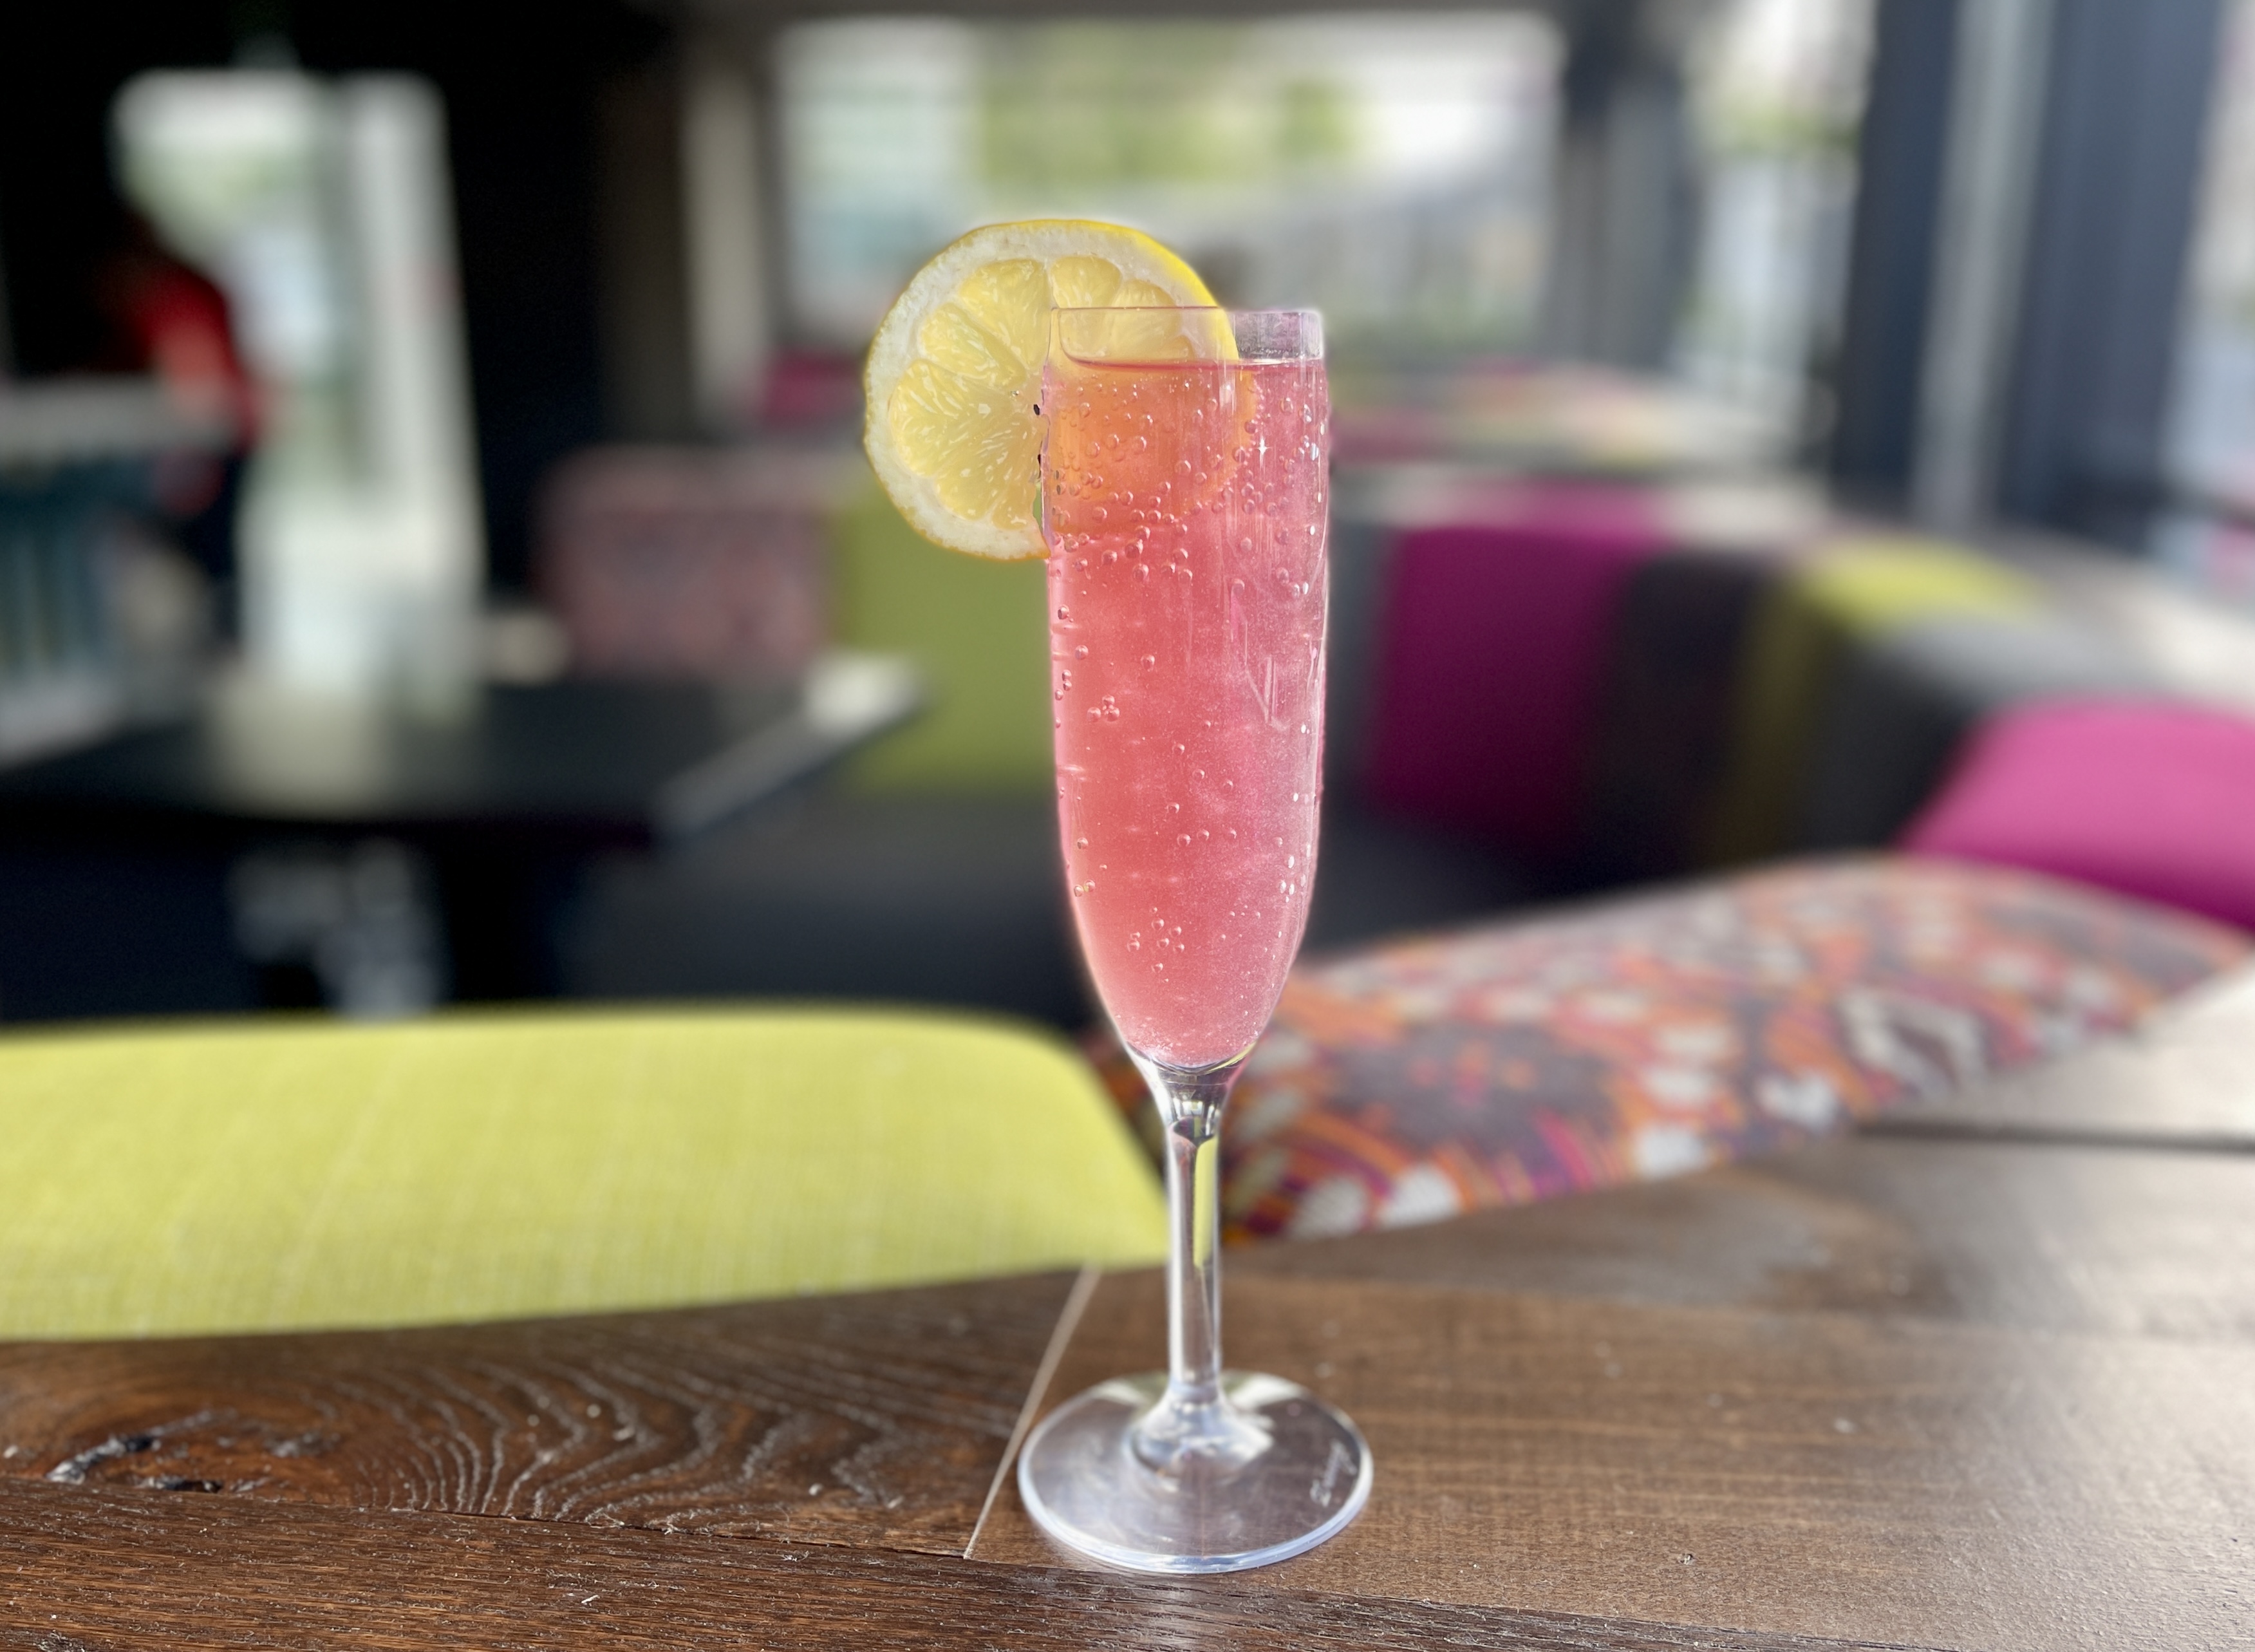 Fizzy “Pretty in Pink” cocktail in a champagne glass with lemon slice as a garnish.